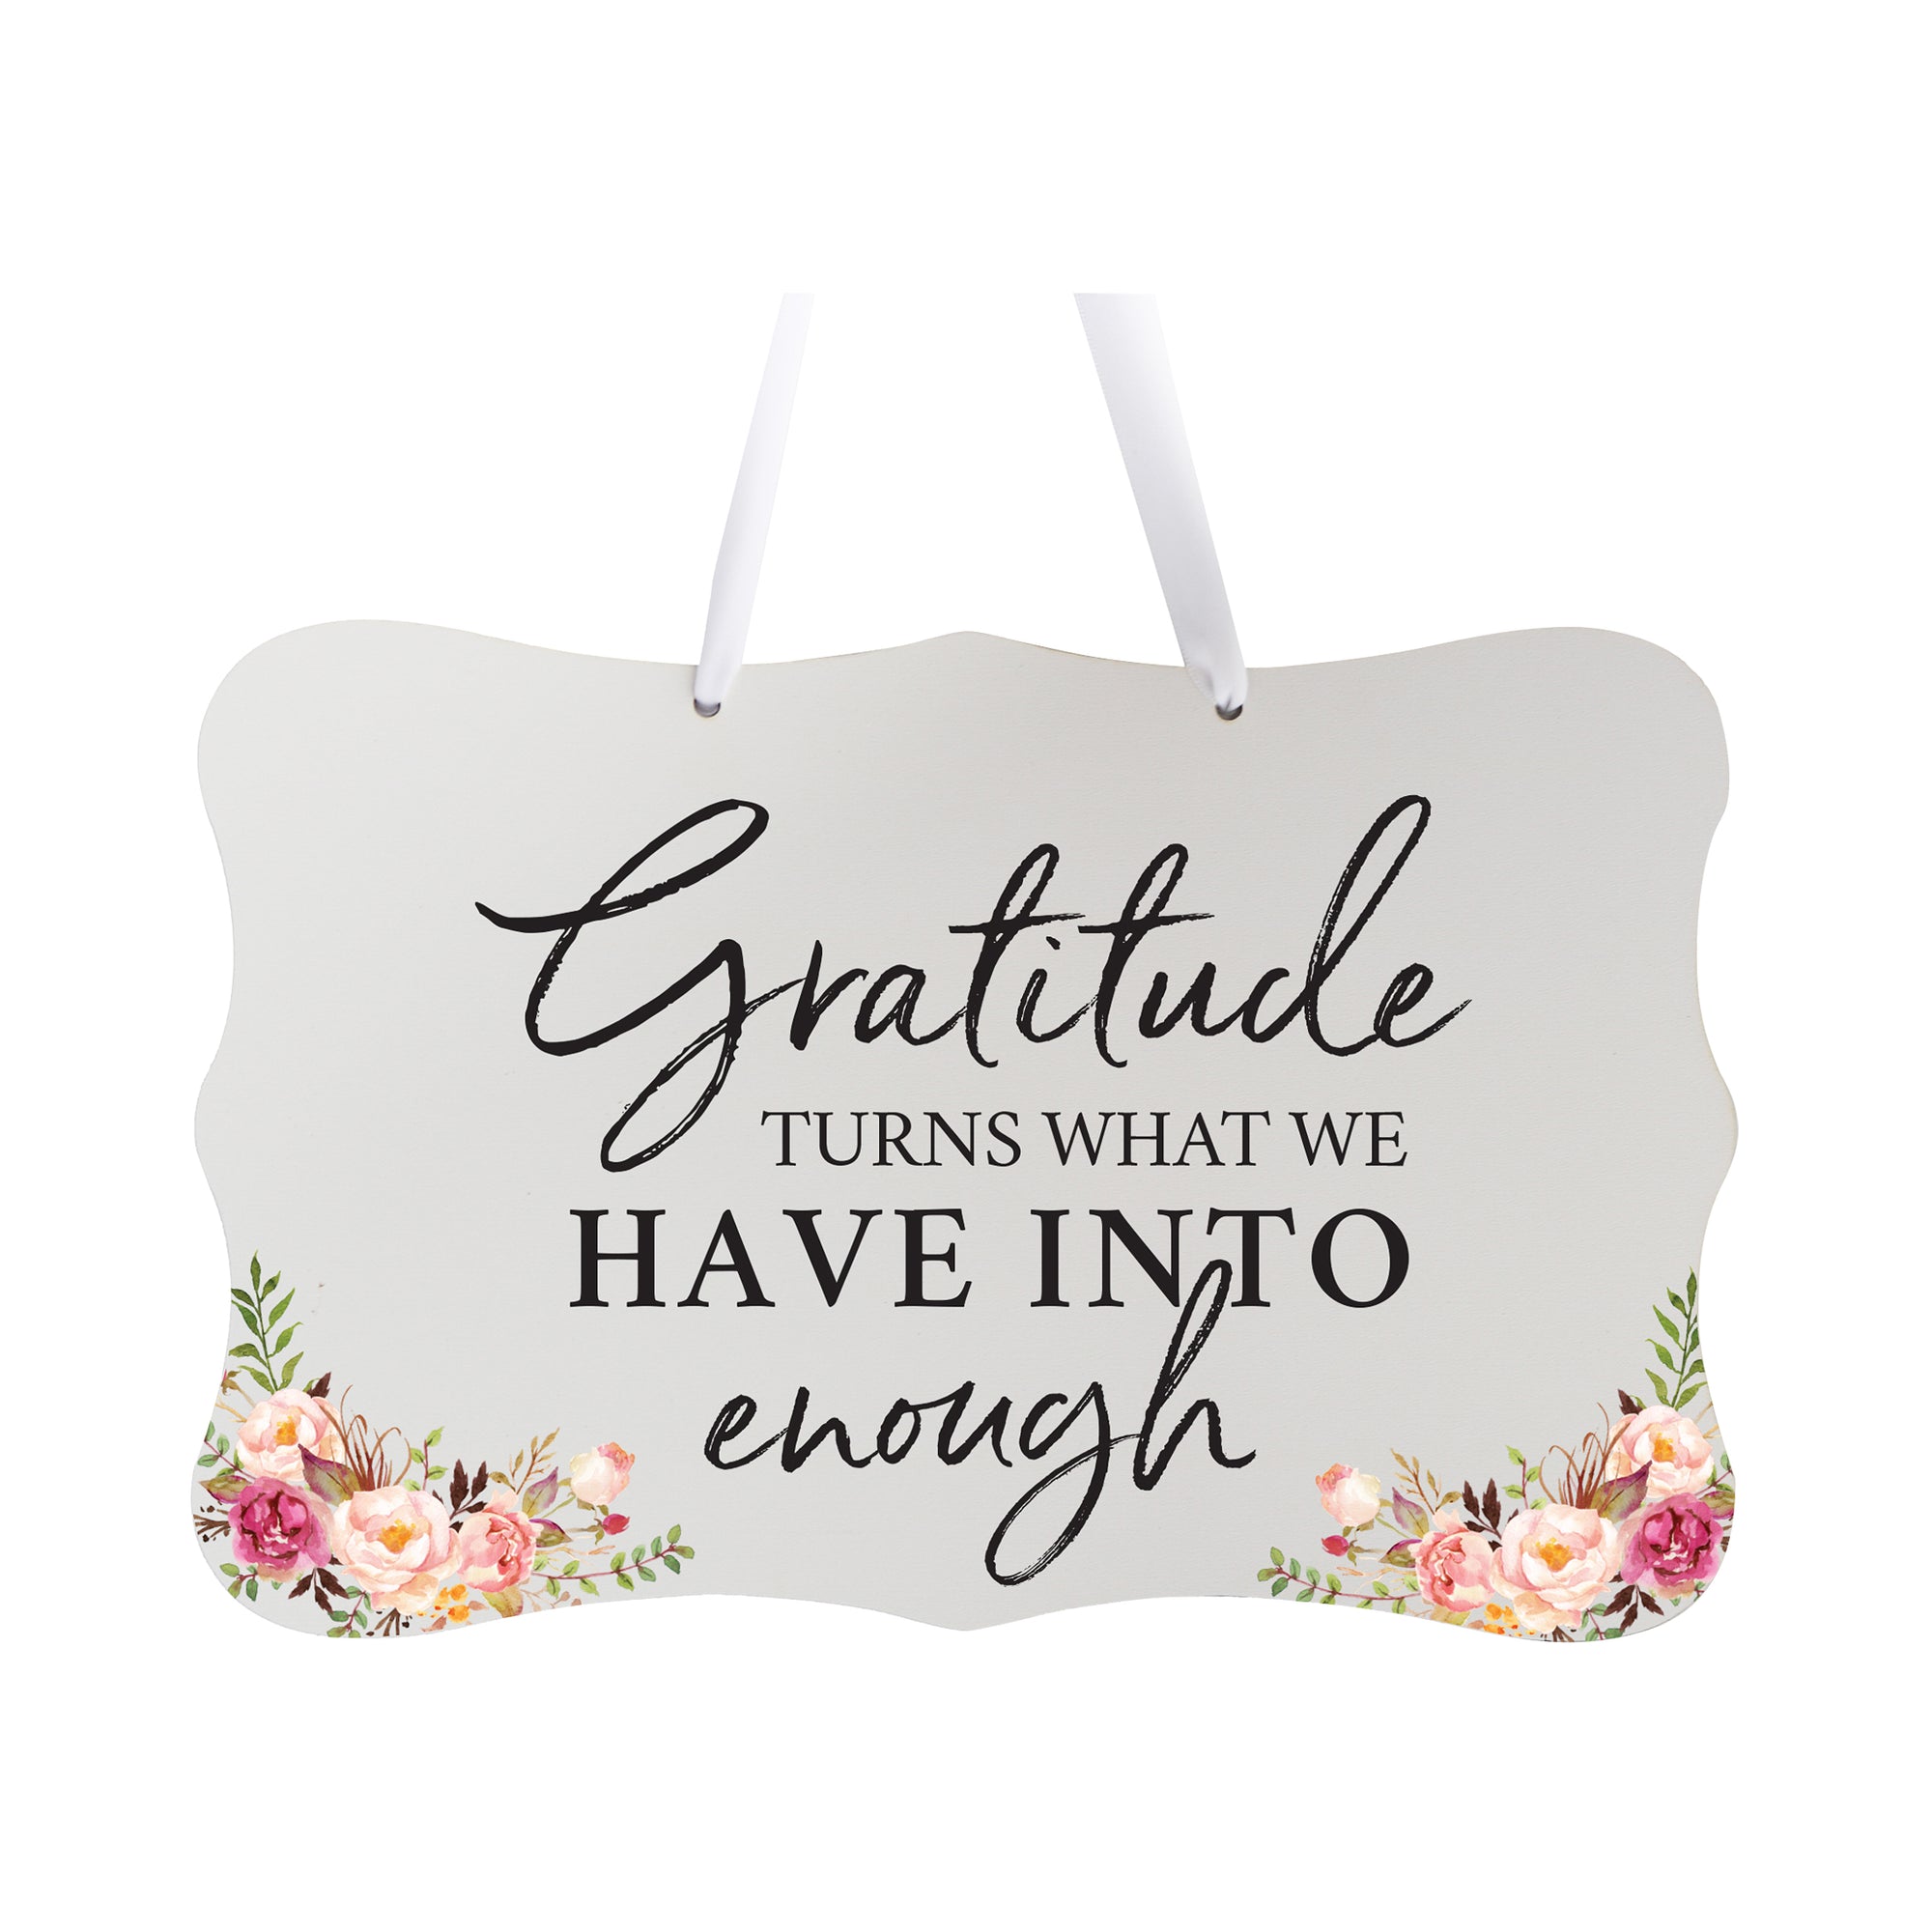 Wooden Wall Hanging Sign for Home Decorations 8x12 - Gratitude Turns